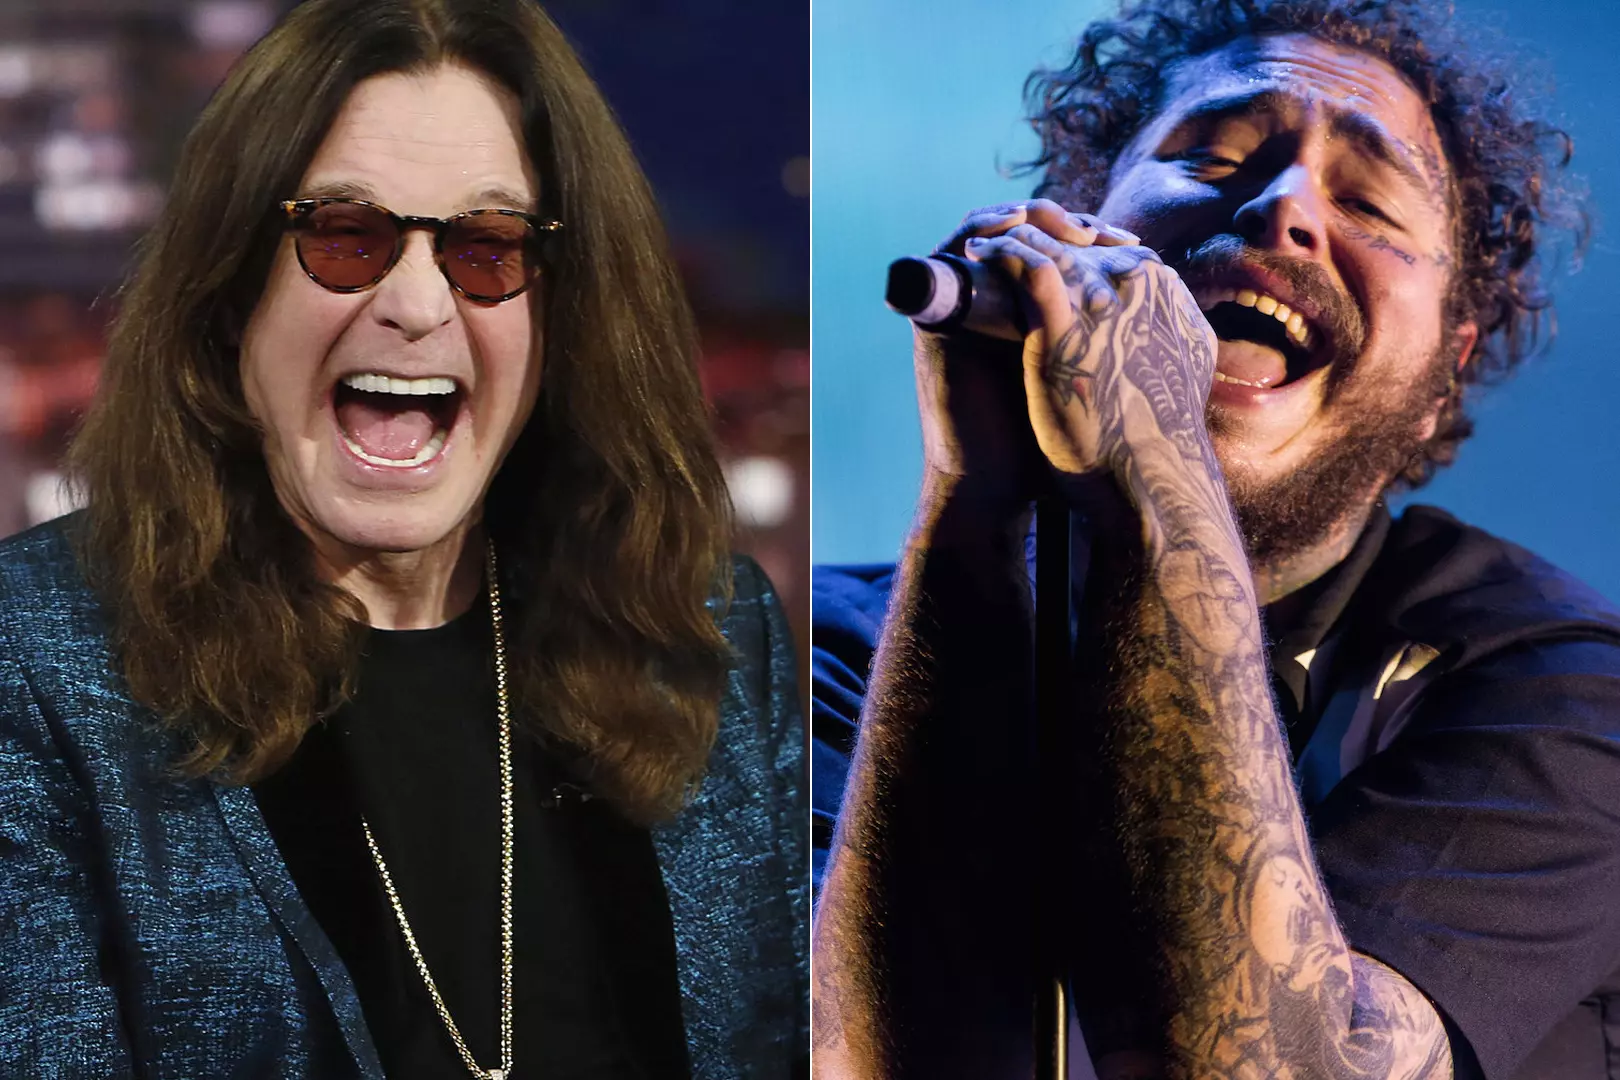 Listen: Ozzy Osbourne Guests on New Post Malone Song